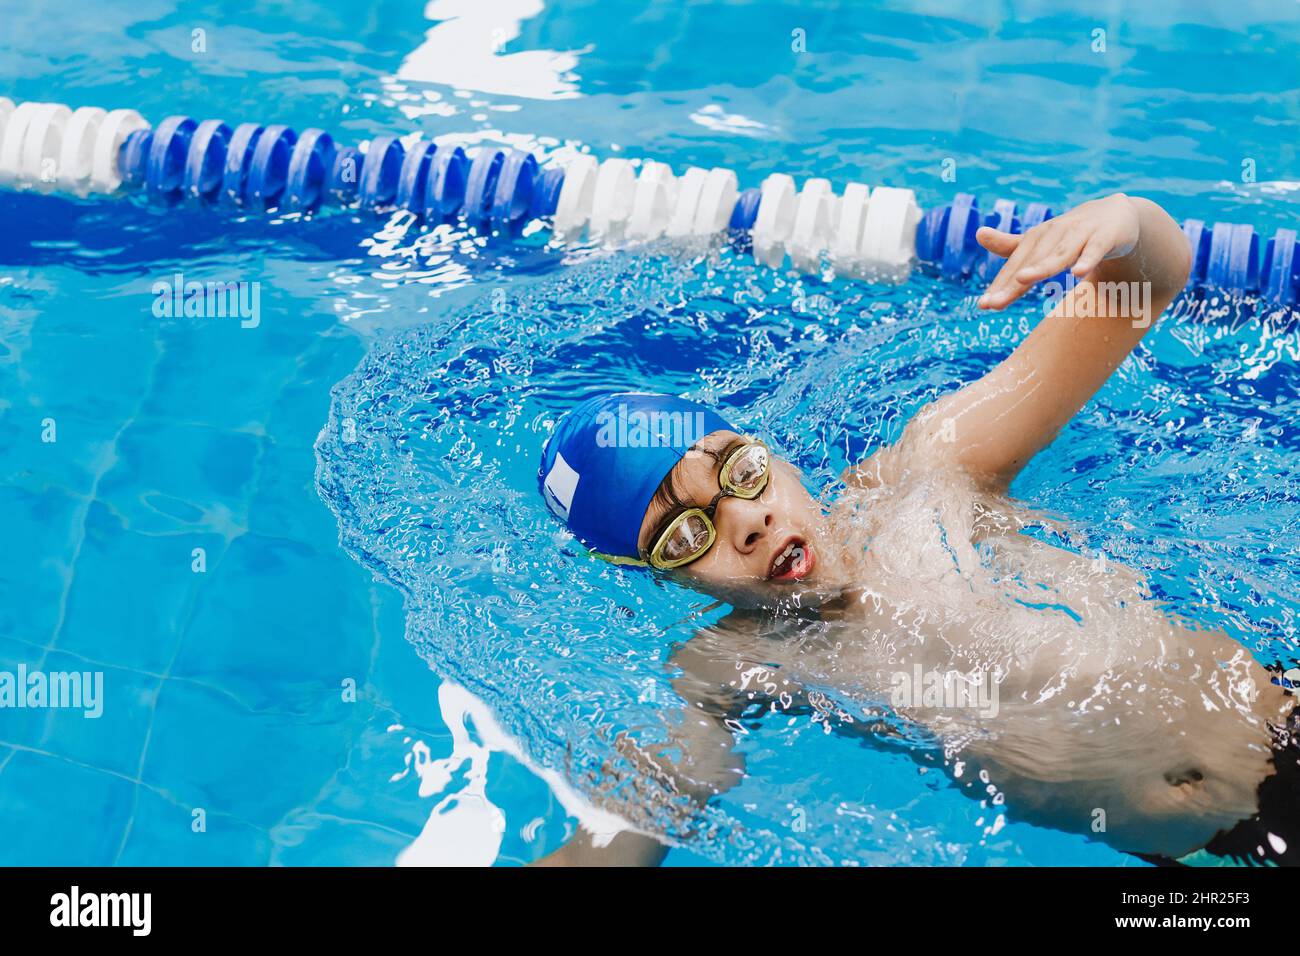 latin child boy swimmer wearing cap and goggles in a swimming training holding On Starting Block In the Pool in Mexico Latin America Stock Photo